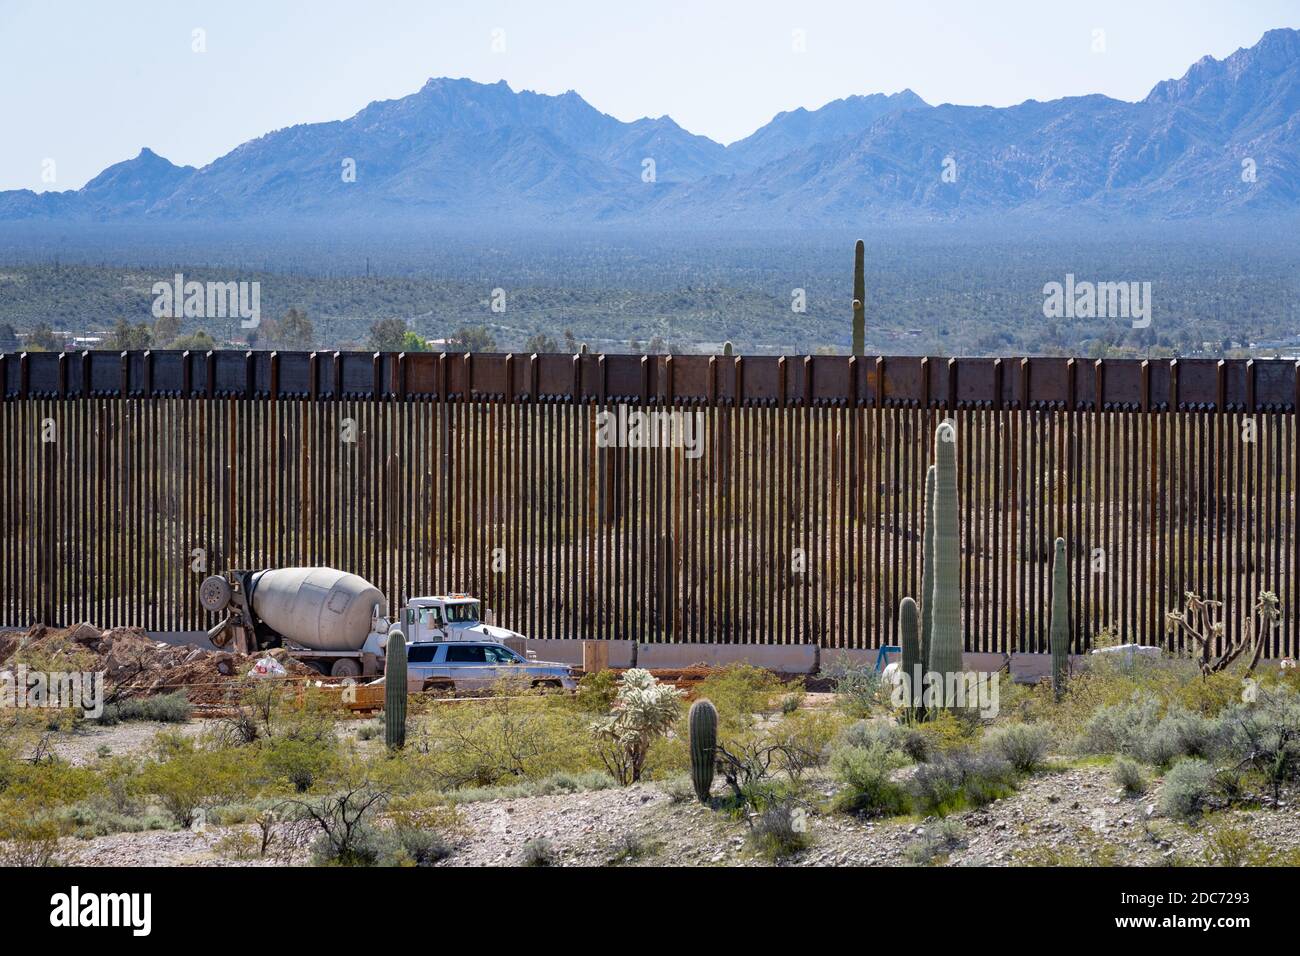 New 30-foot sections of bollard panels at a build site for a section of the U.S. - Mexican border wall, known at the Trump Wall March 4, 2020 near Lukeville, Arizona. Stock Photo